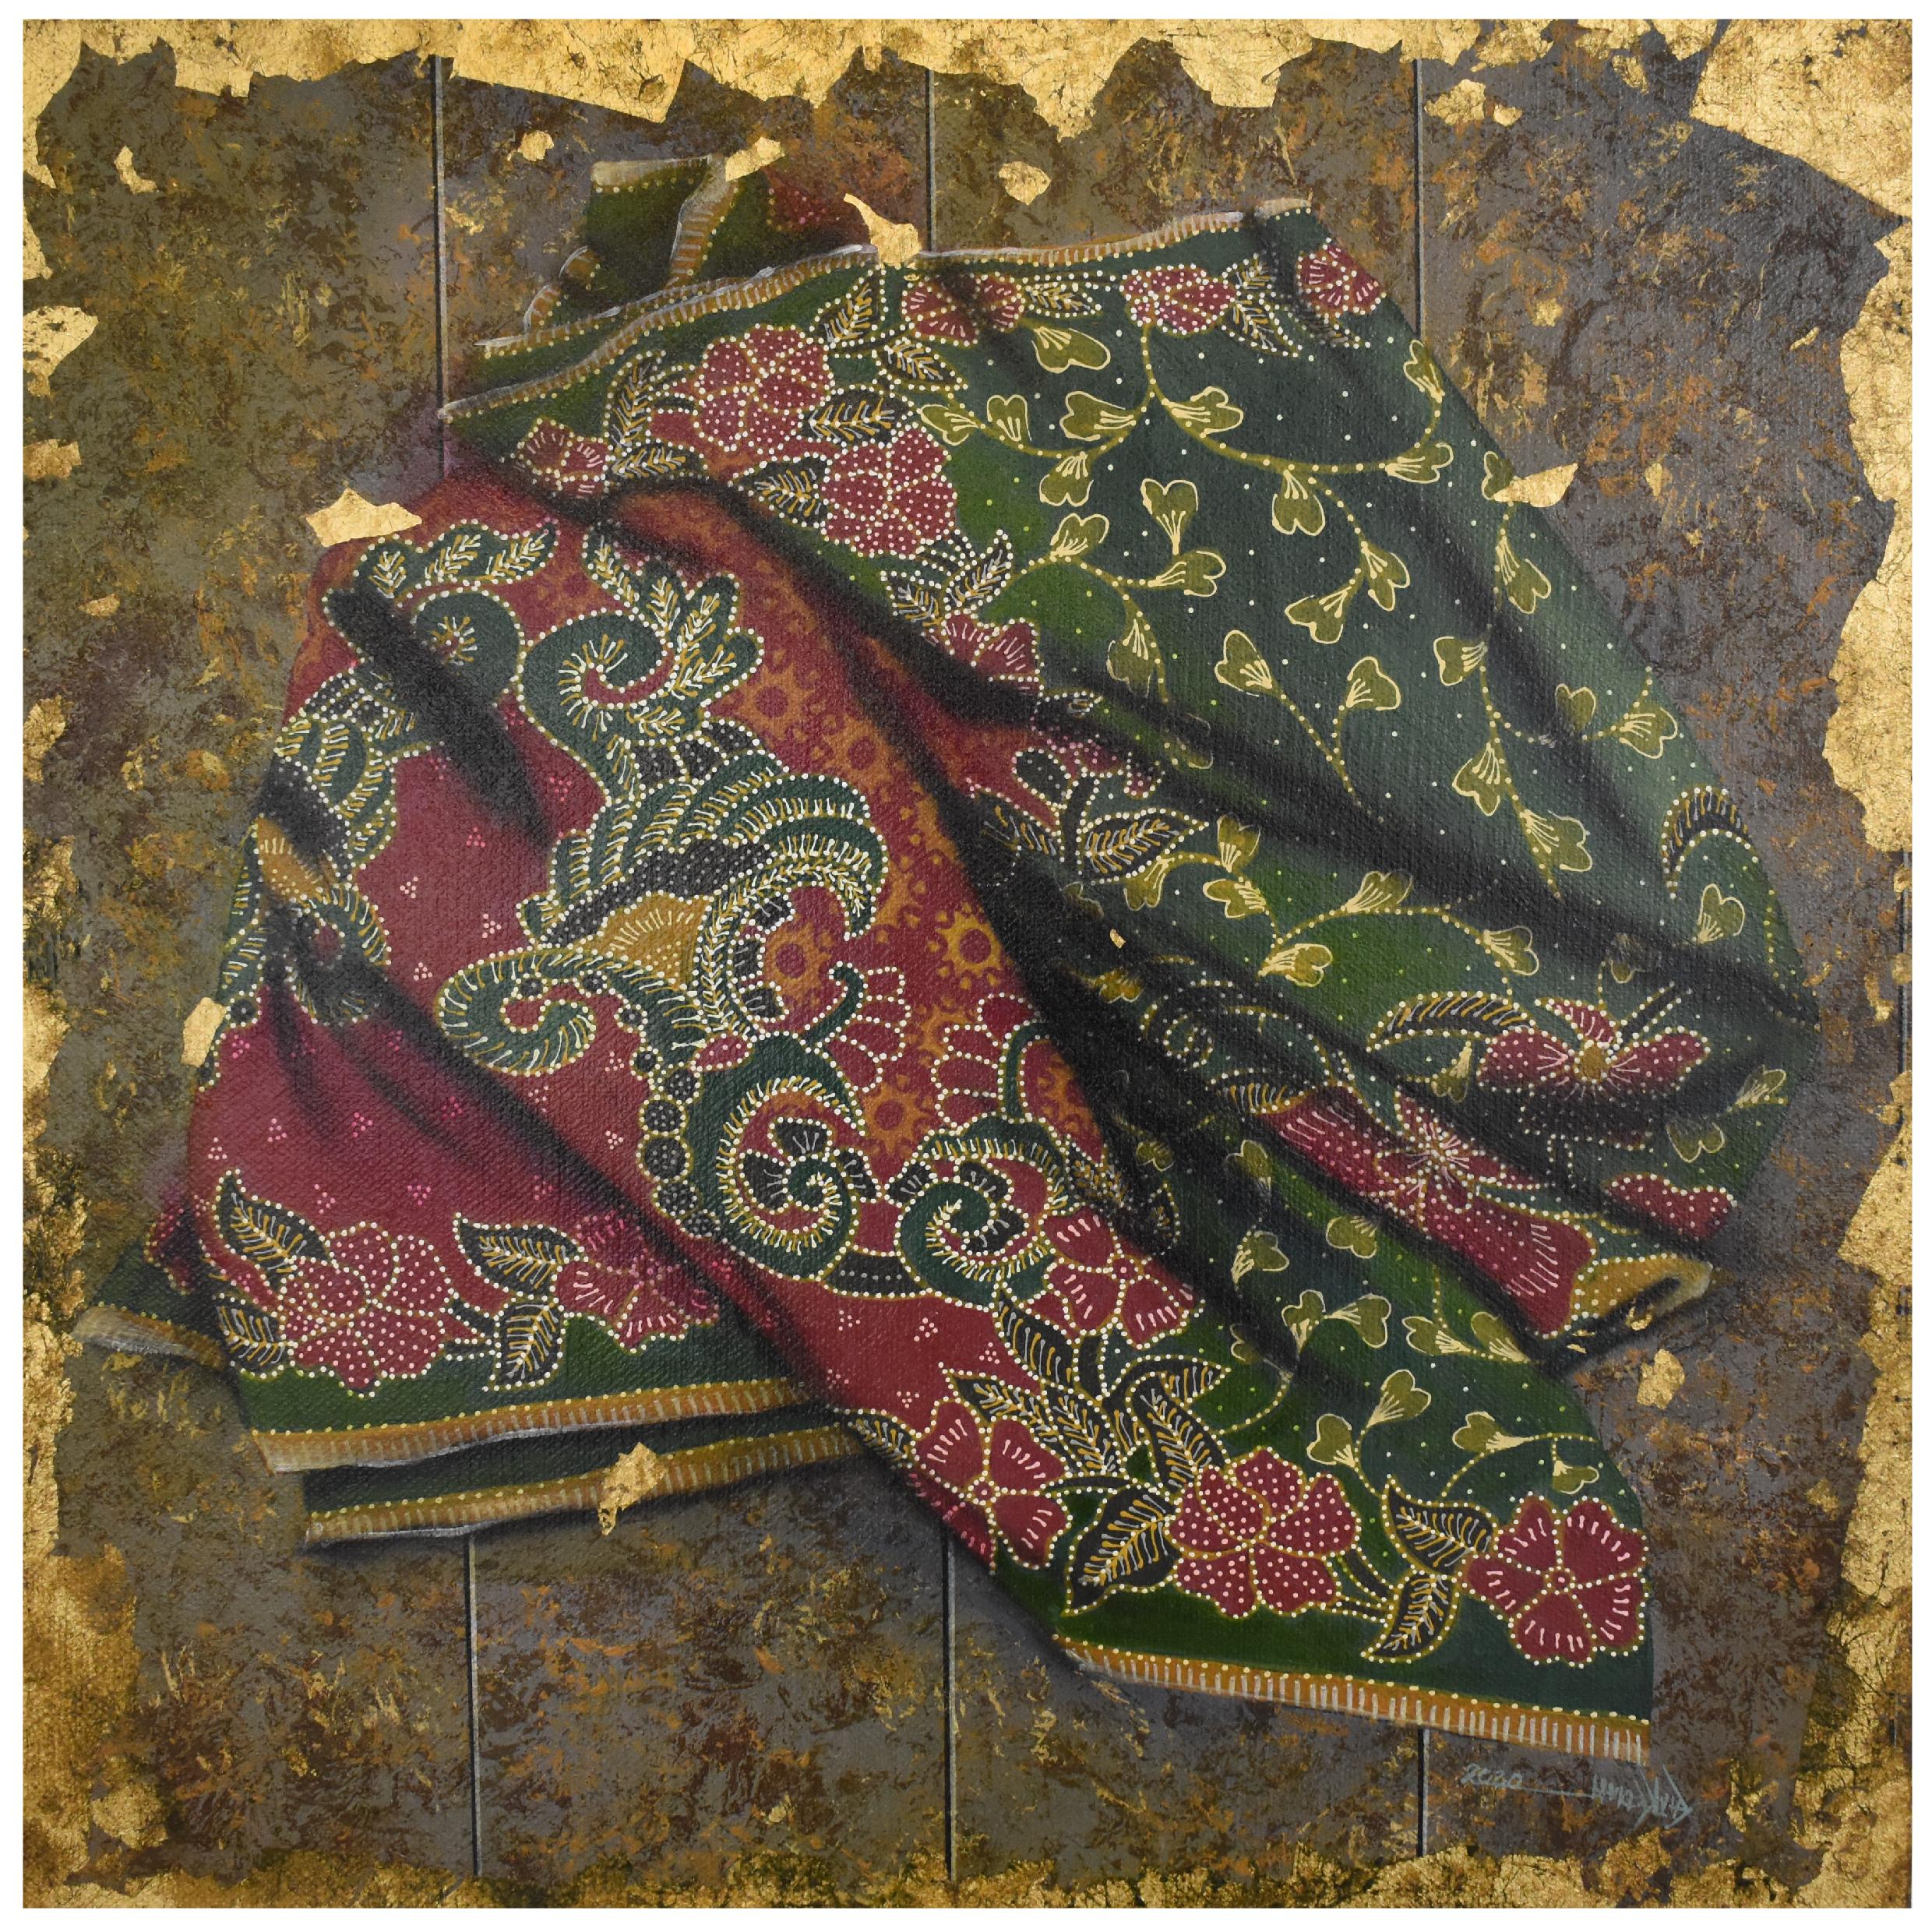 Tony Ng Still-Life Painting - Colorful & Hyperrealistic Batik Painting On Jute Attached With Goldleafs 